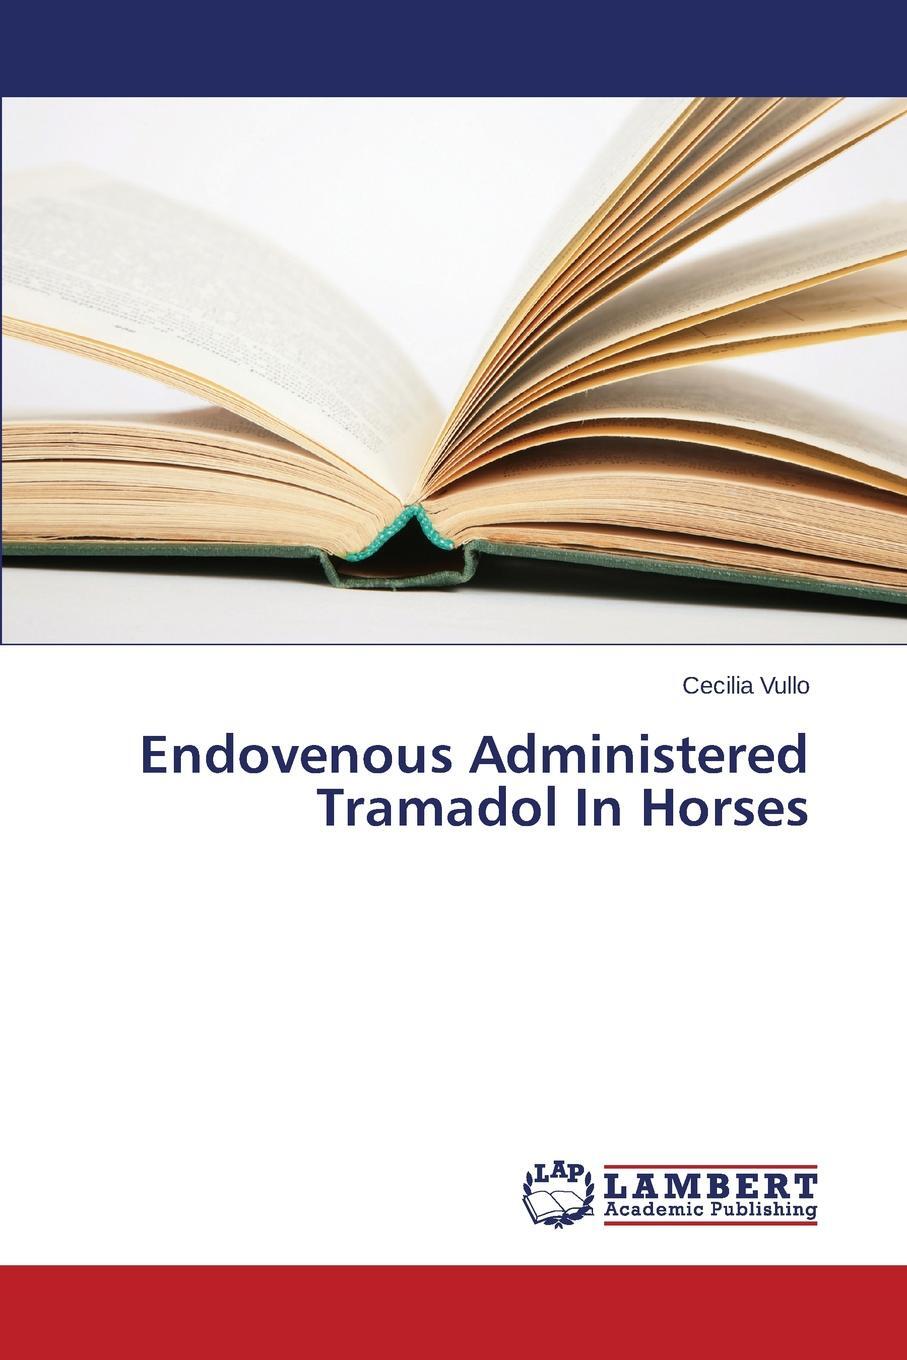 фото Endovenous Administered Tramadol in Horses